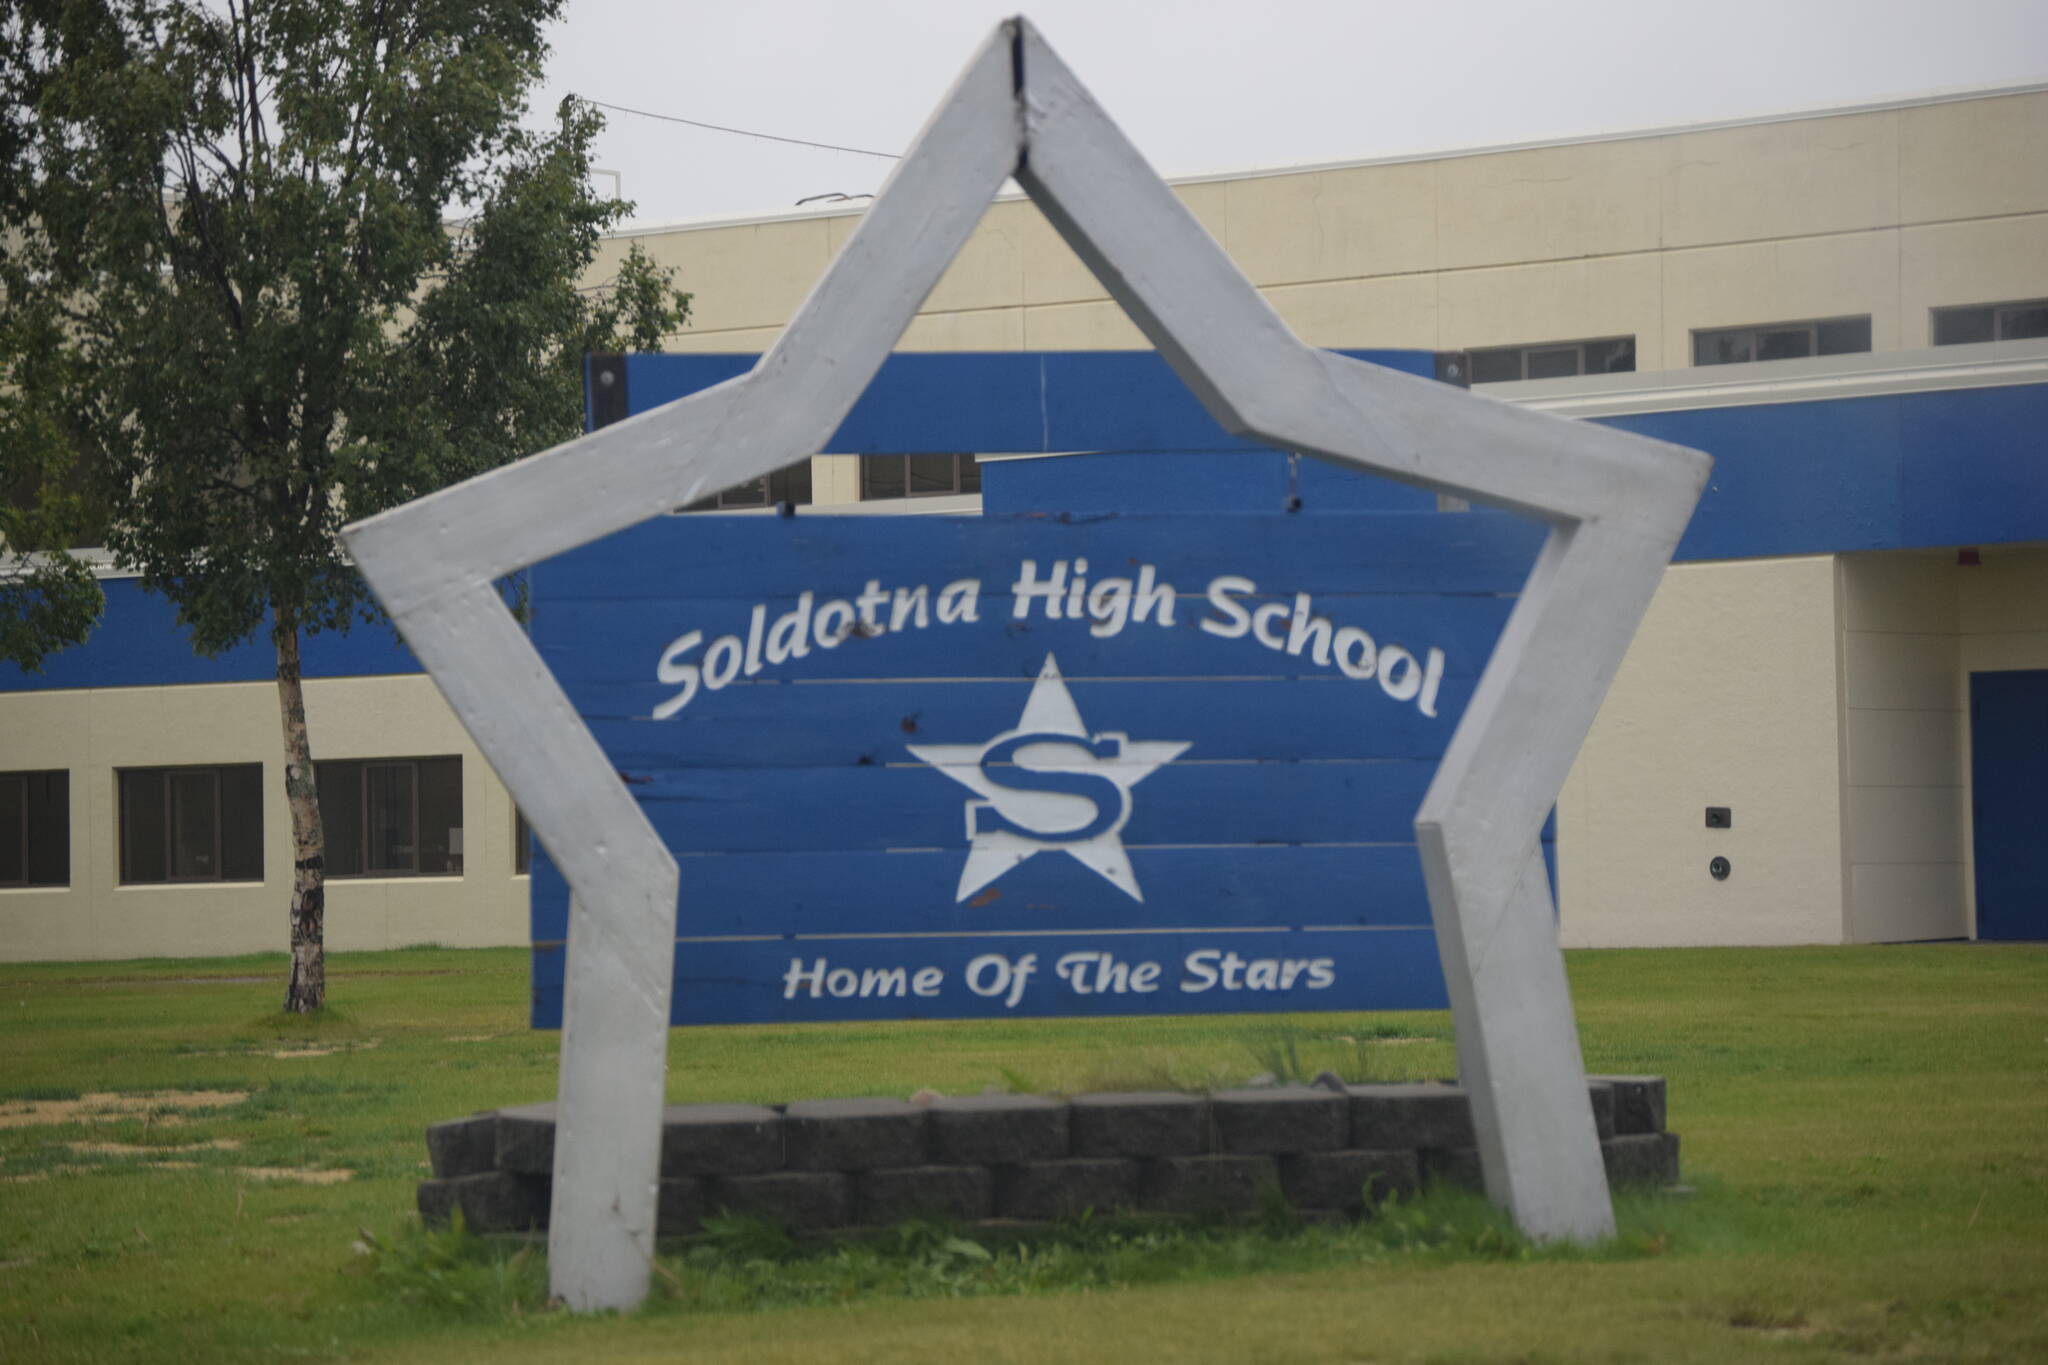 Soldotna High School can be seen in this Sept. 2, 2021, photo, in Soldotna, Alaska. (Photo by Jeff Helminiak/Peninsula Clarion file)